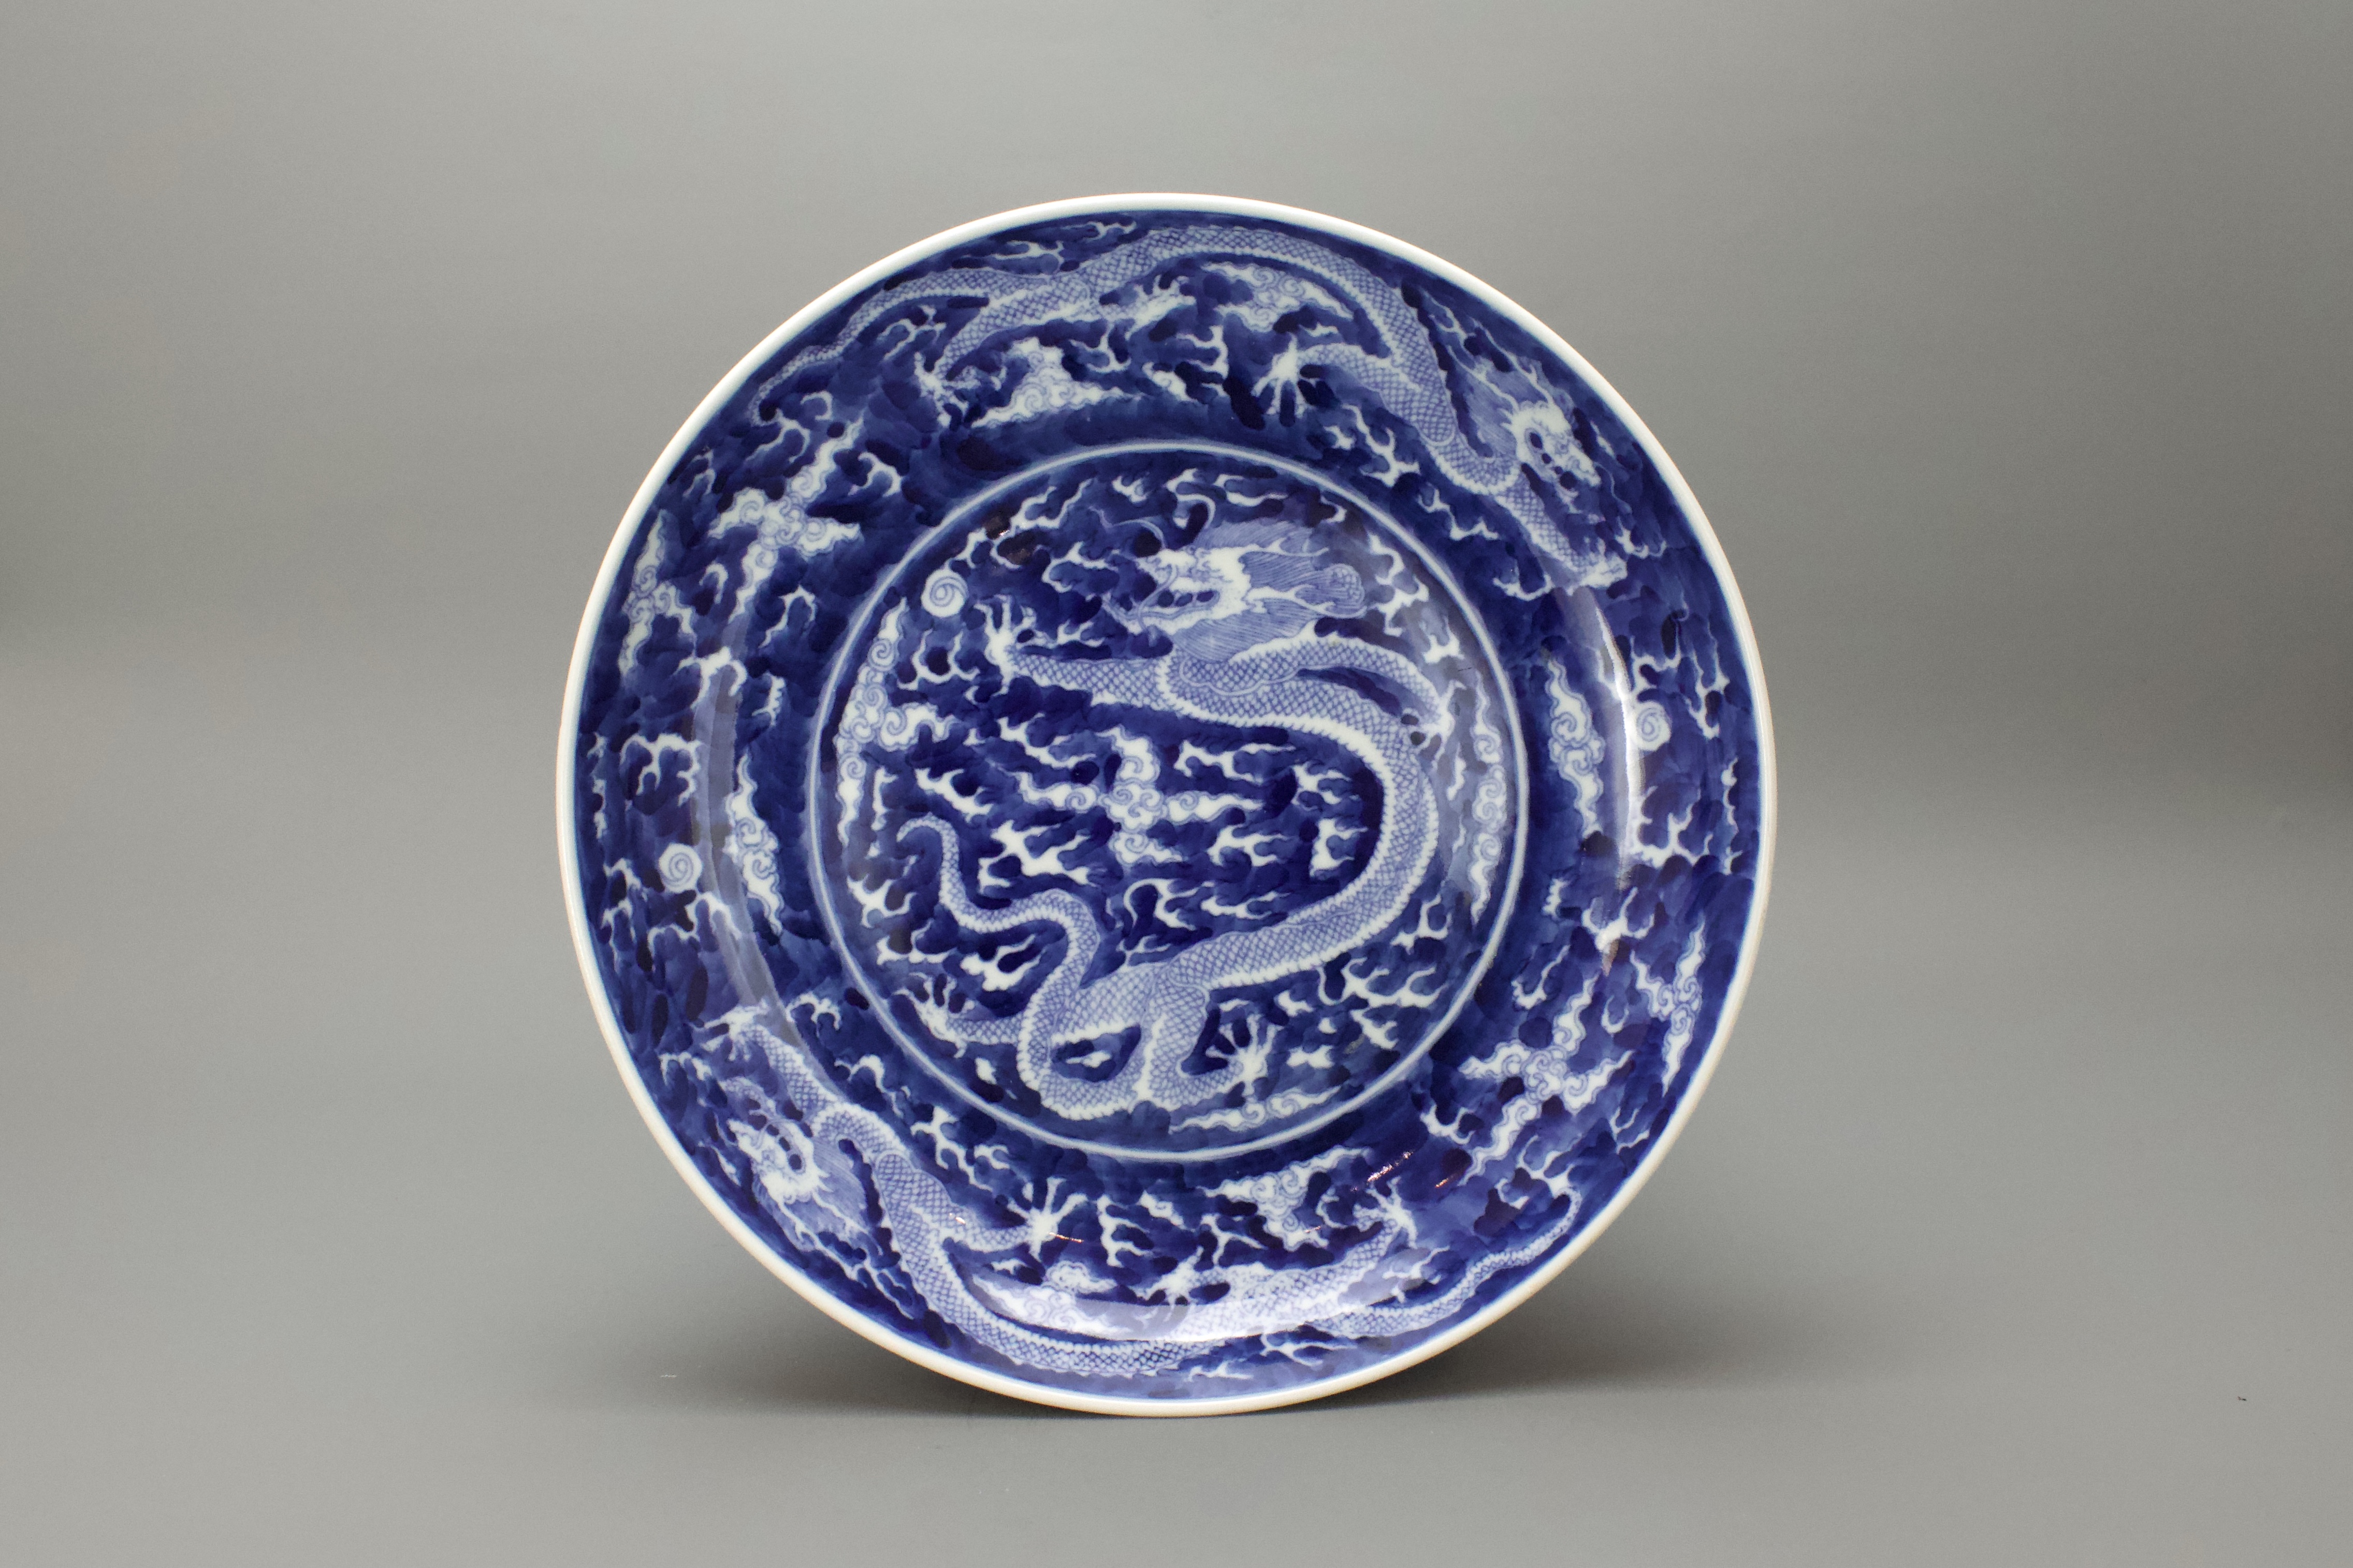 A Blue and White Dragon Dish, six character mark of Kangxi W:24.5cm decorated with dragons